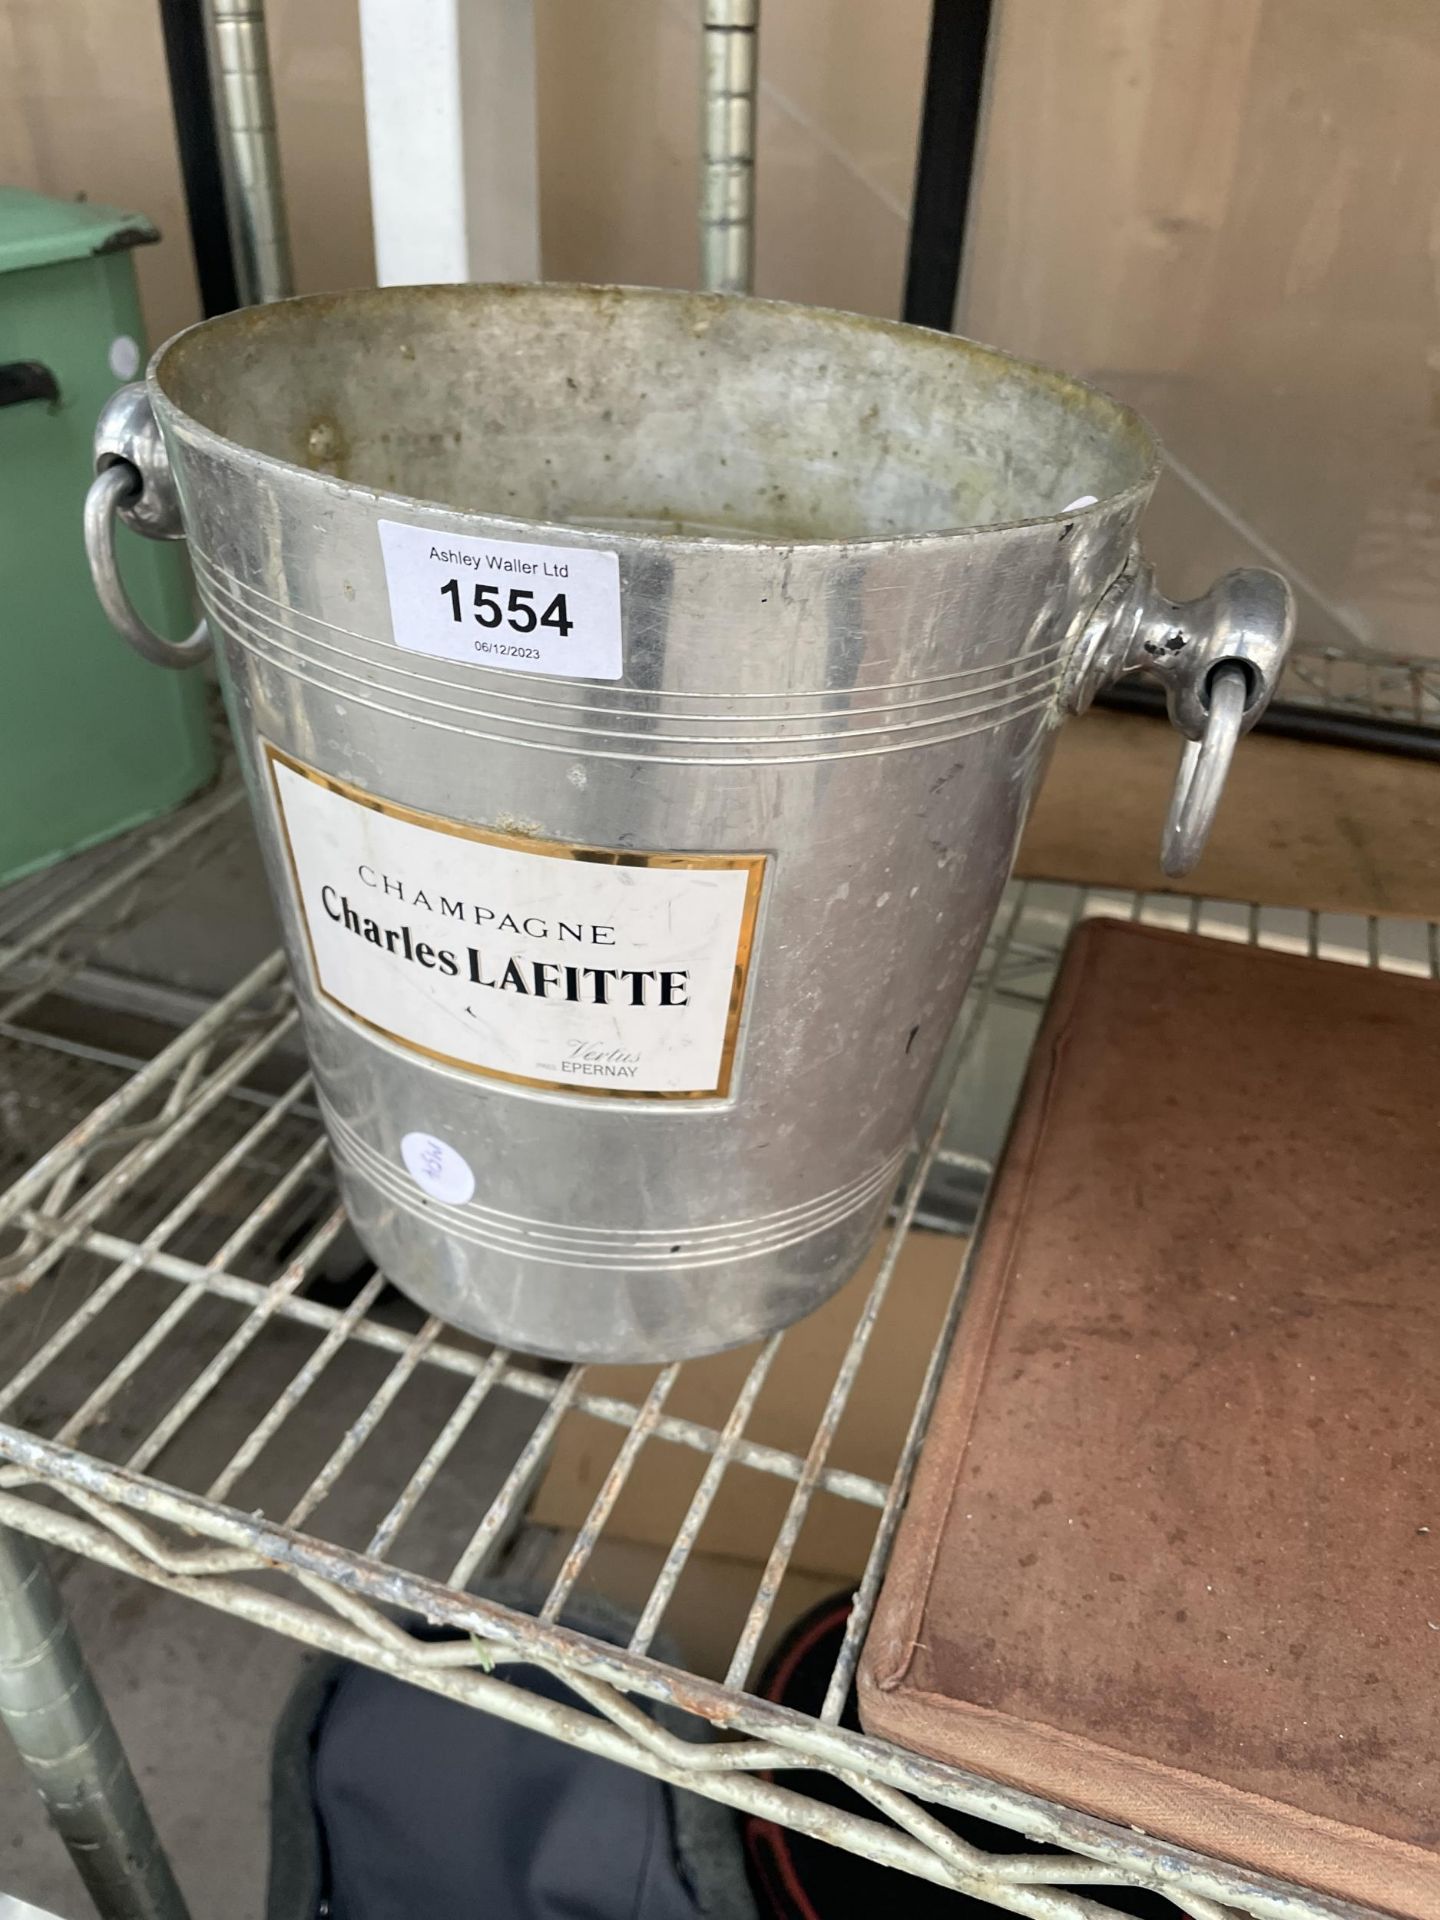 AN ICE BUCKET BEARING THE LABEL 'CHAMPAGNE CHARLES LAFITTE